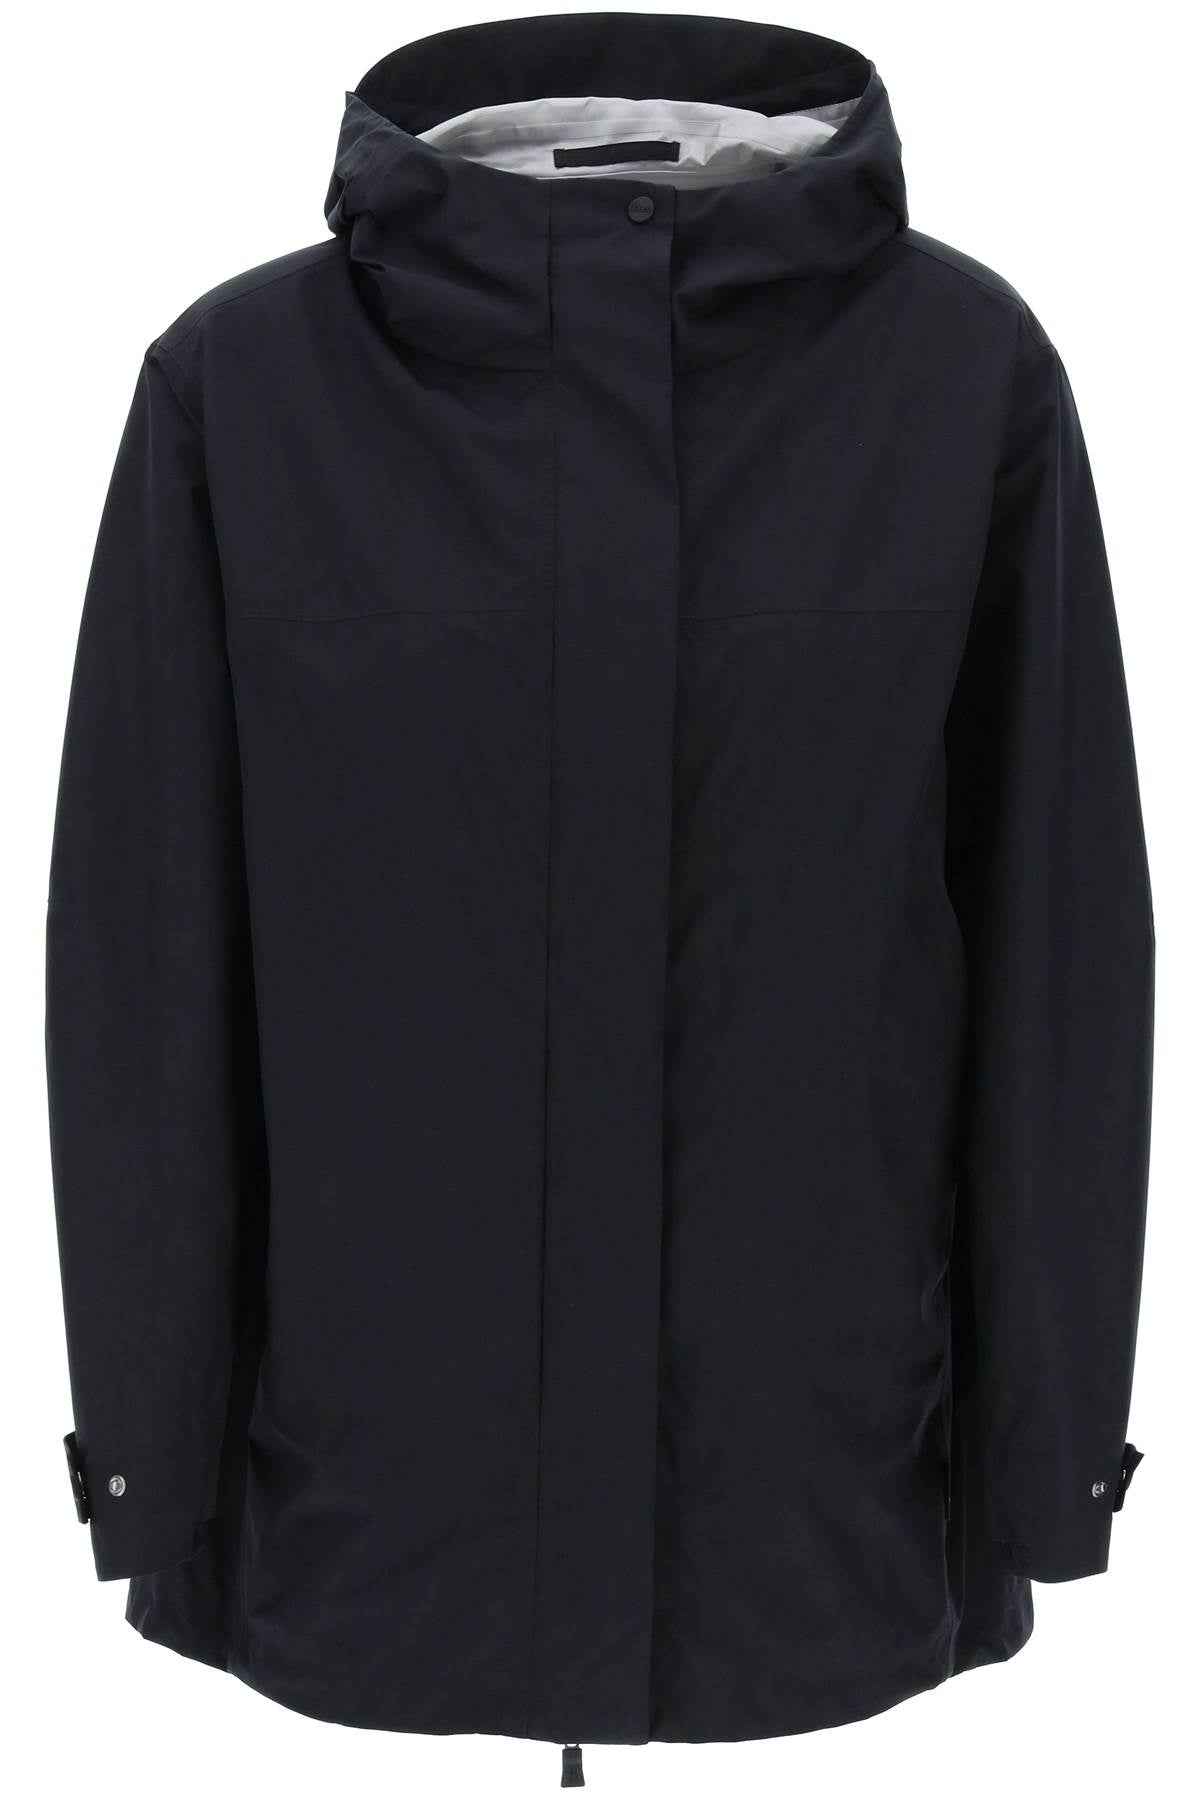 HERNO Gore-Tex Lightweight Hooded Jacket from Laminar Line for Women